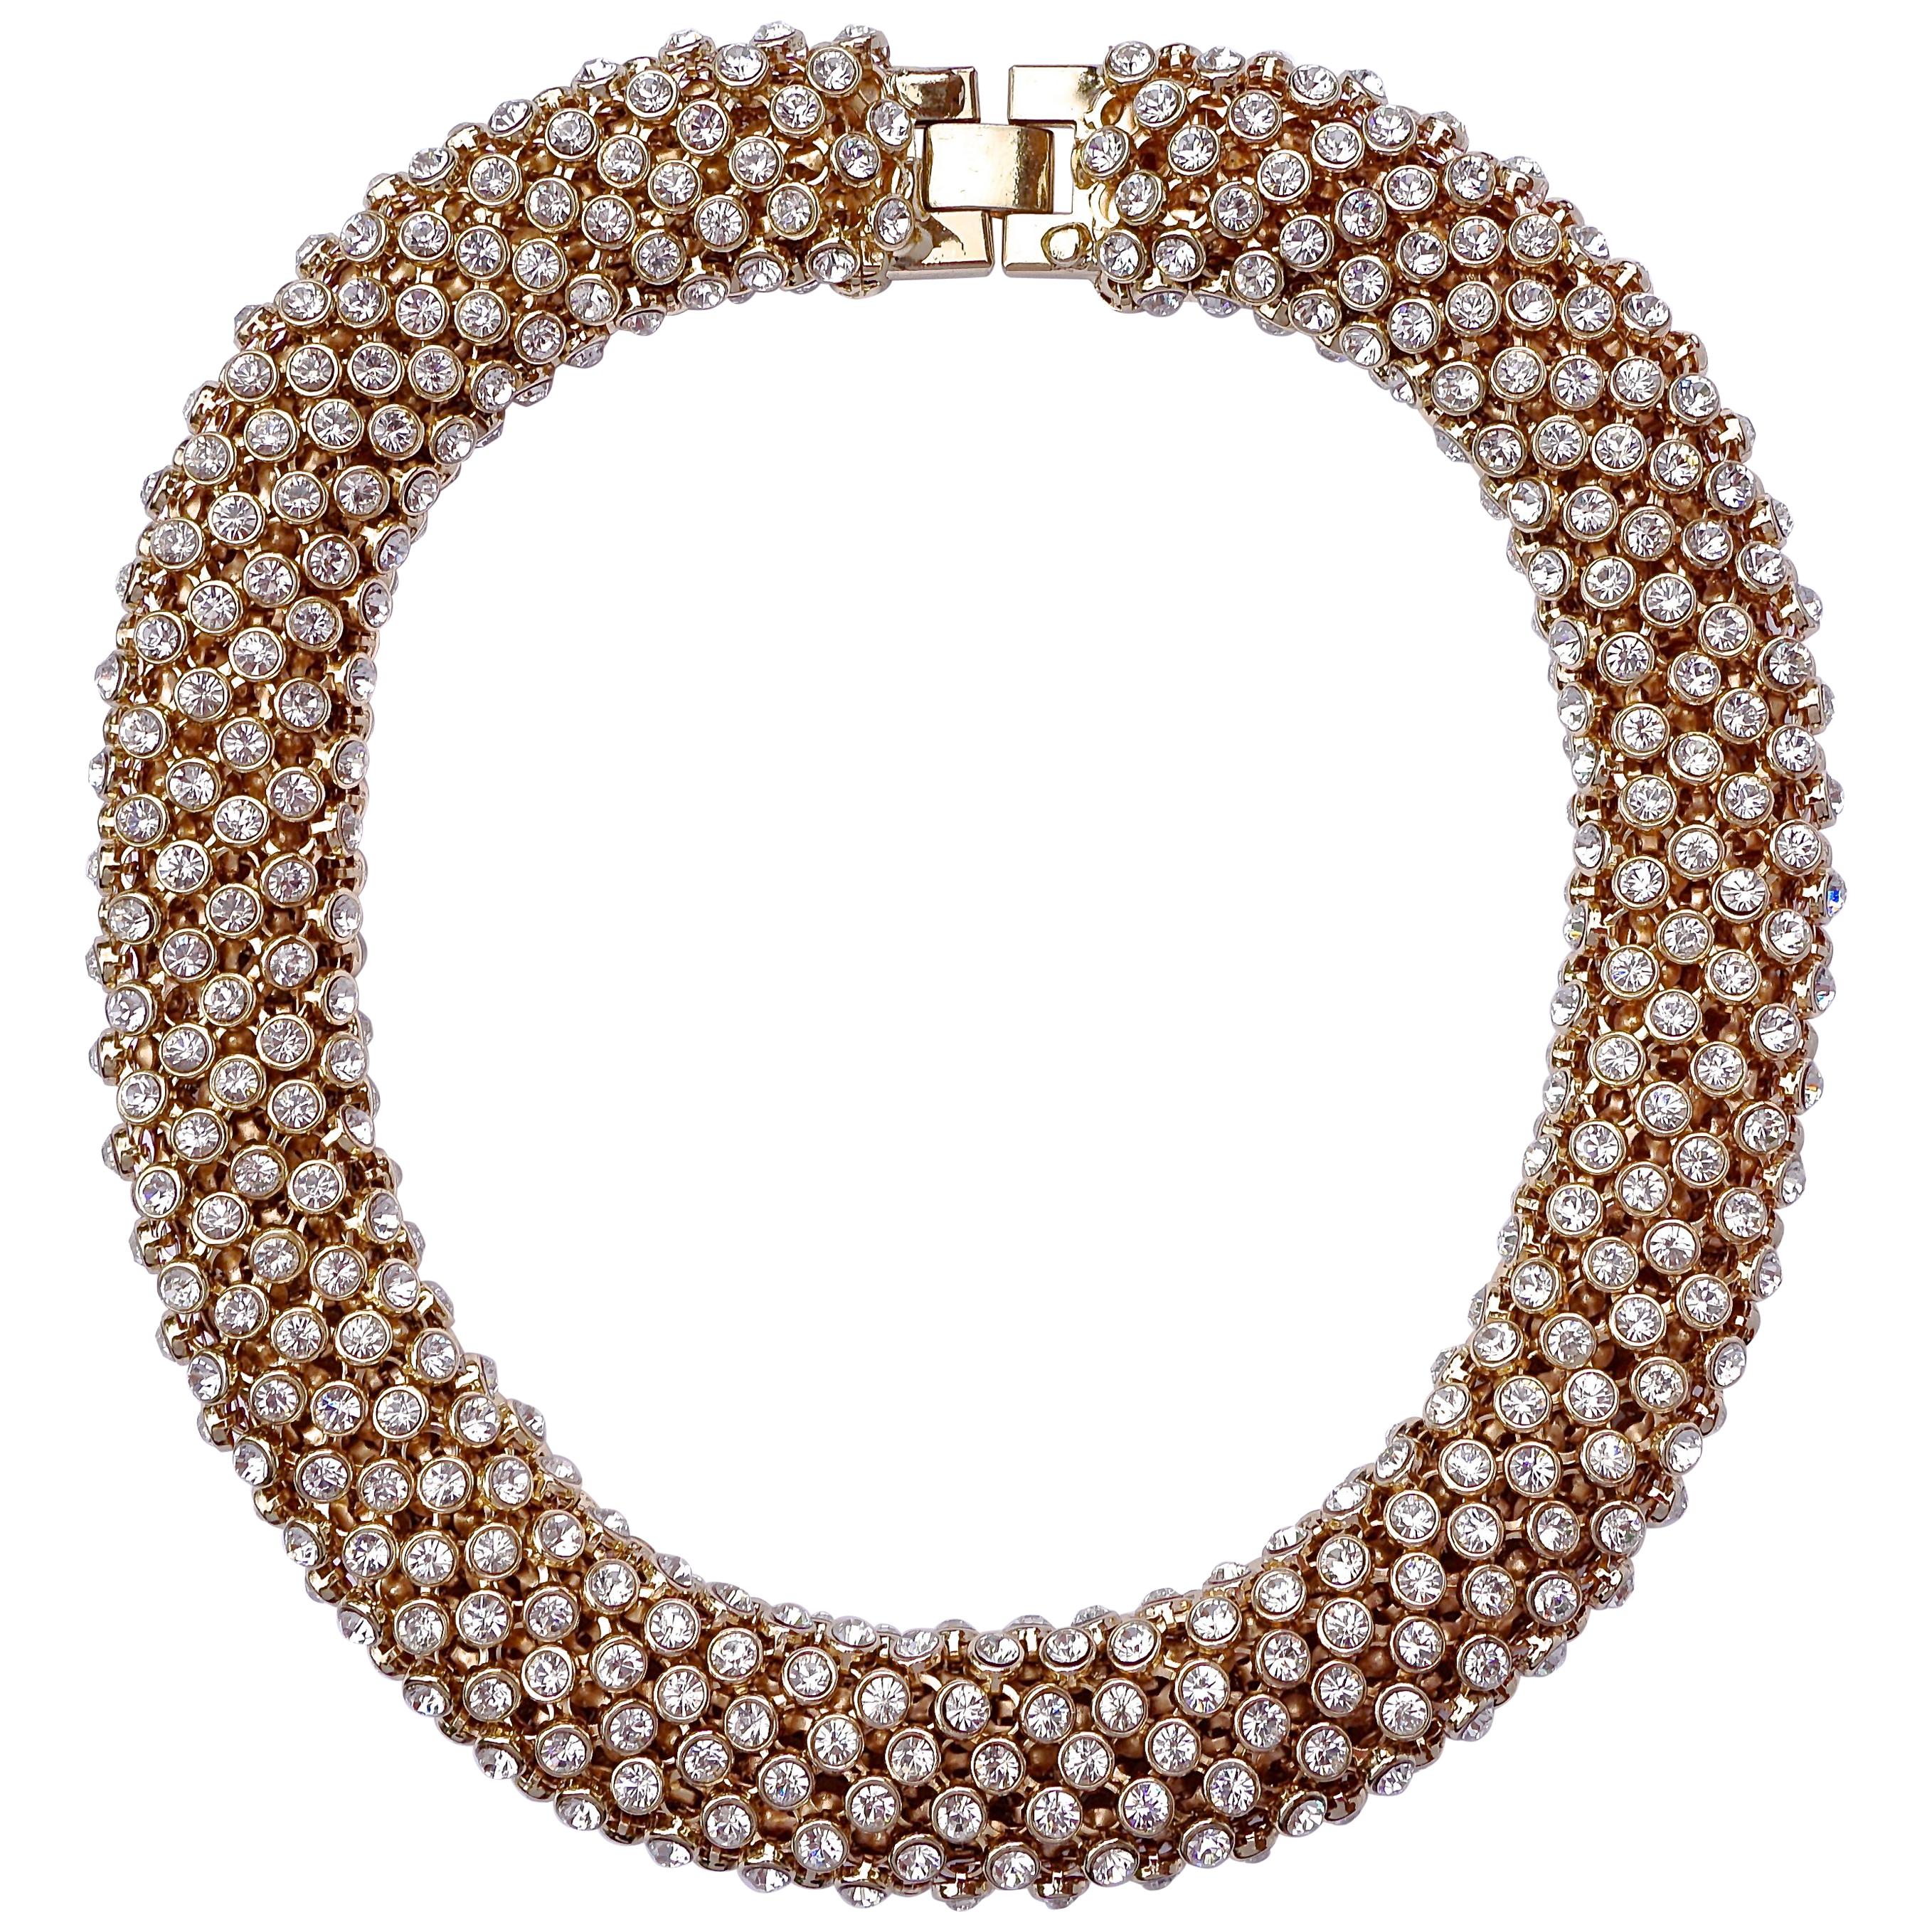 Gold Tone and Clear Rhinestones Vintage Collar Necklace, circa 1980s